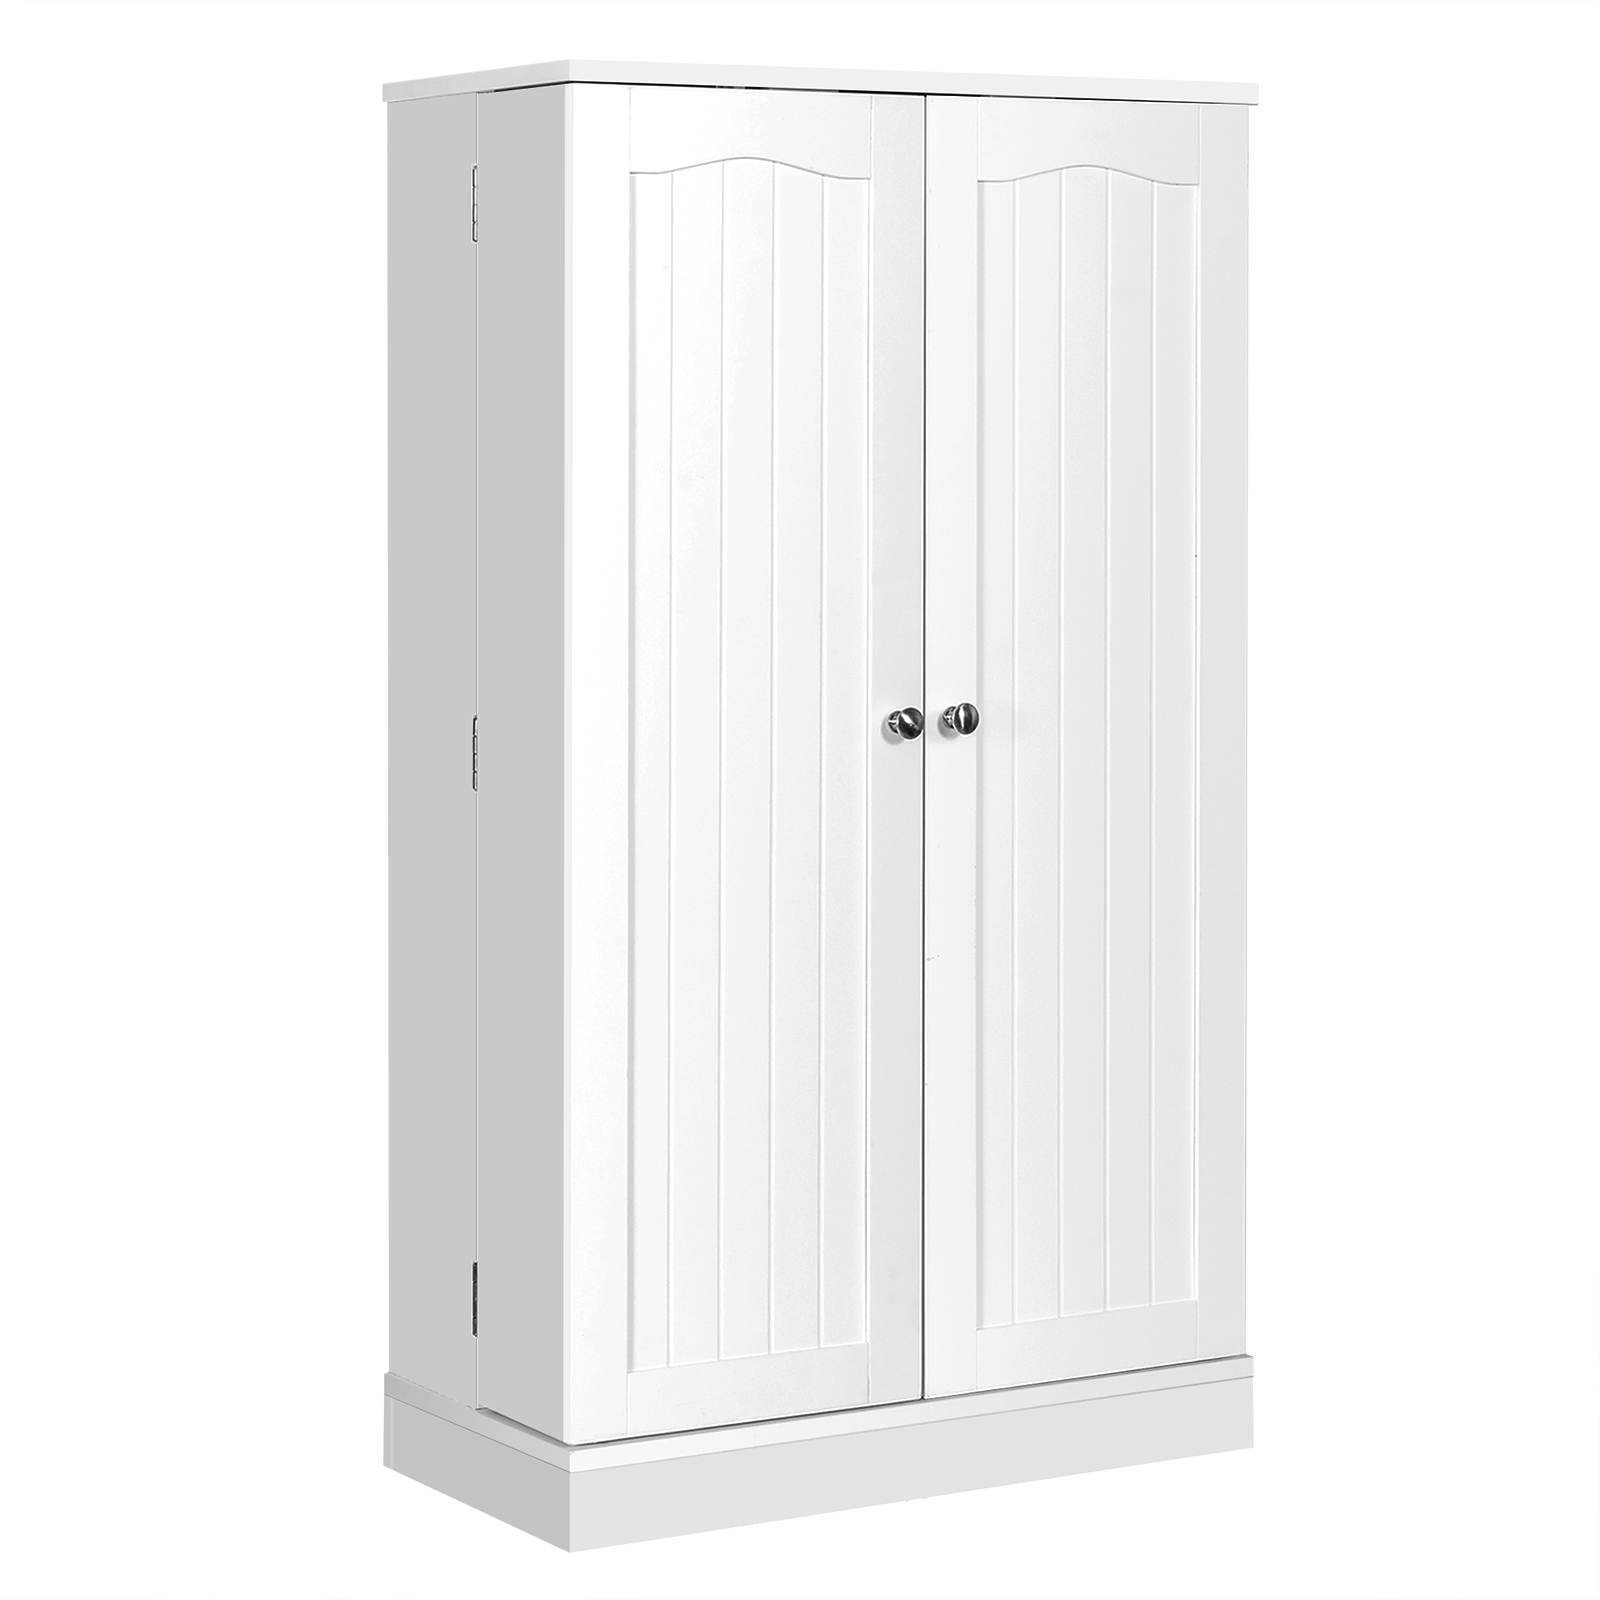 2-Door Pantry Cabinet with 6 Adjustable Shelves-White